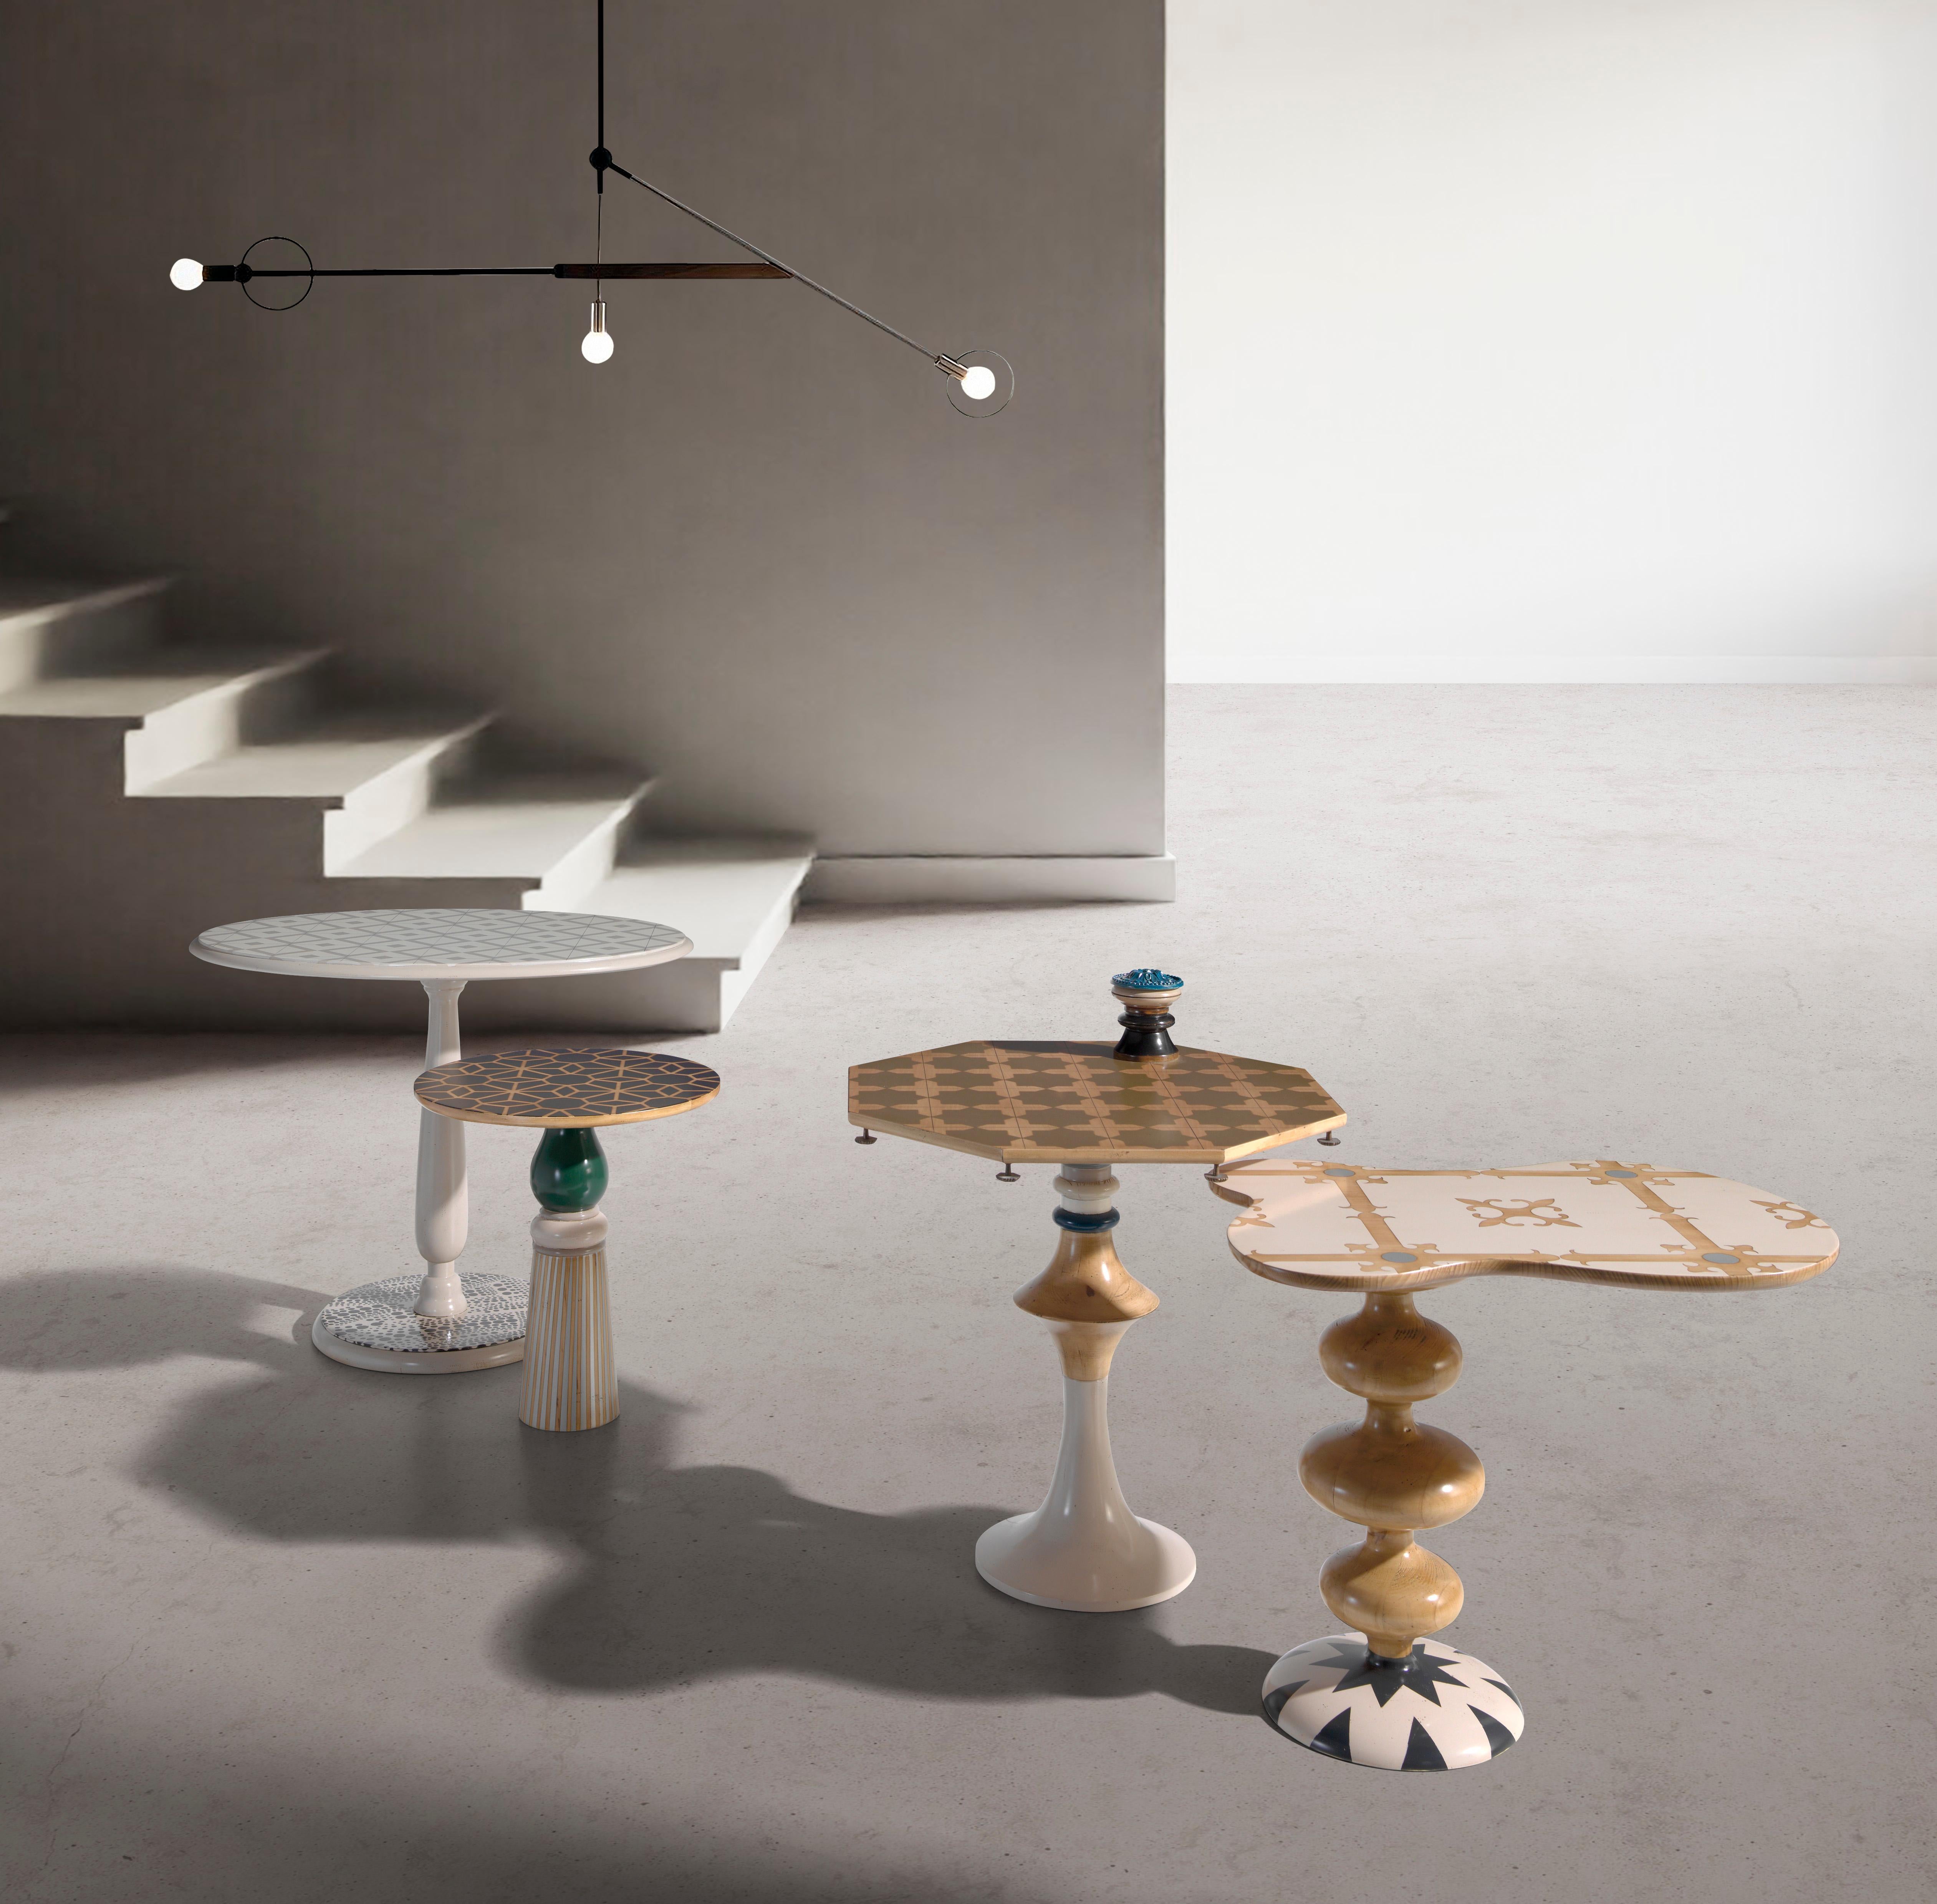 The Marcela coffee tables are a clear example of the possibilities that wood can have when seeking to pour imagination into craftsmanship; unique designs with personality. Thinking that everything is possible is the secret to creating its unexpected